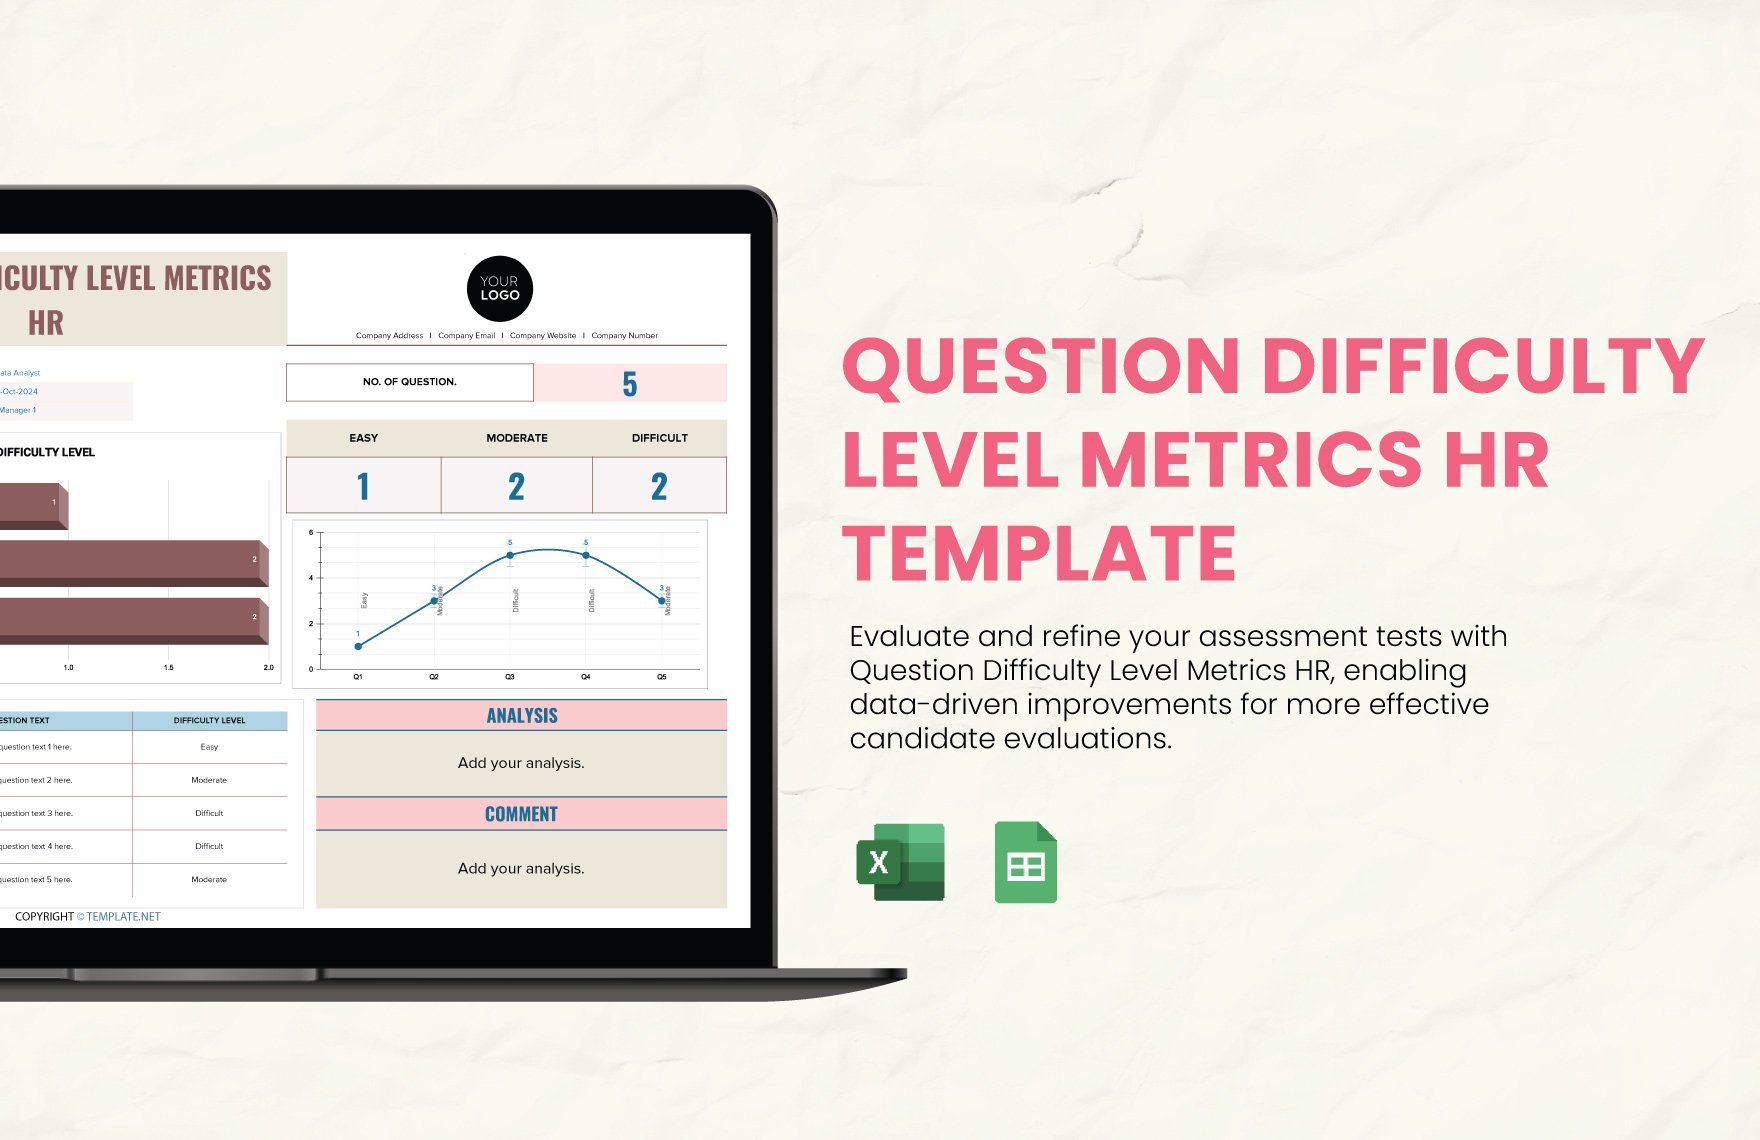 Question Difficulty Level Metrics HR Template